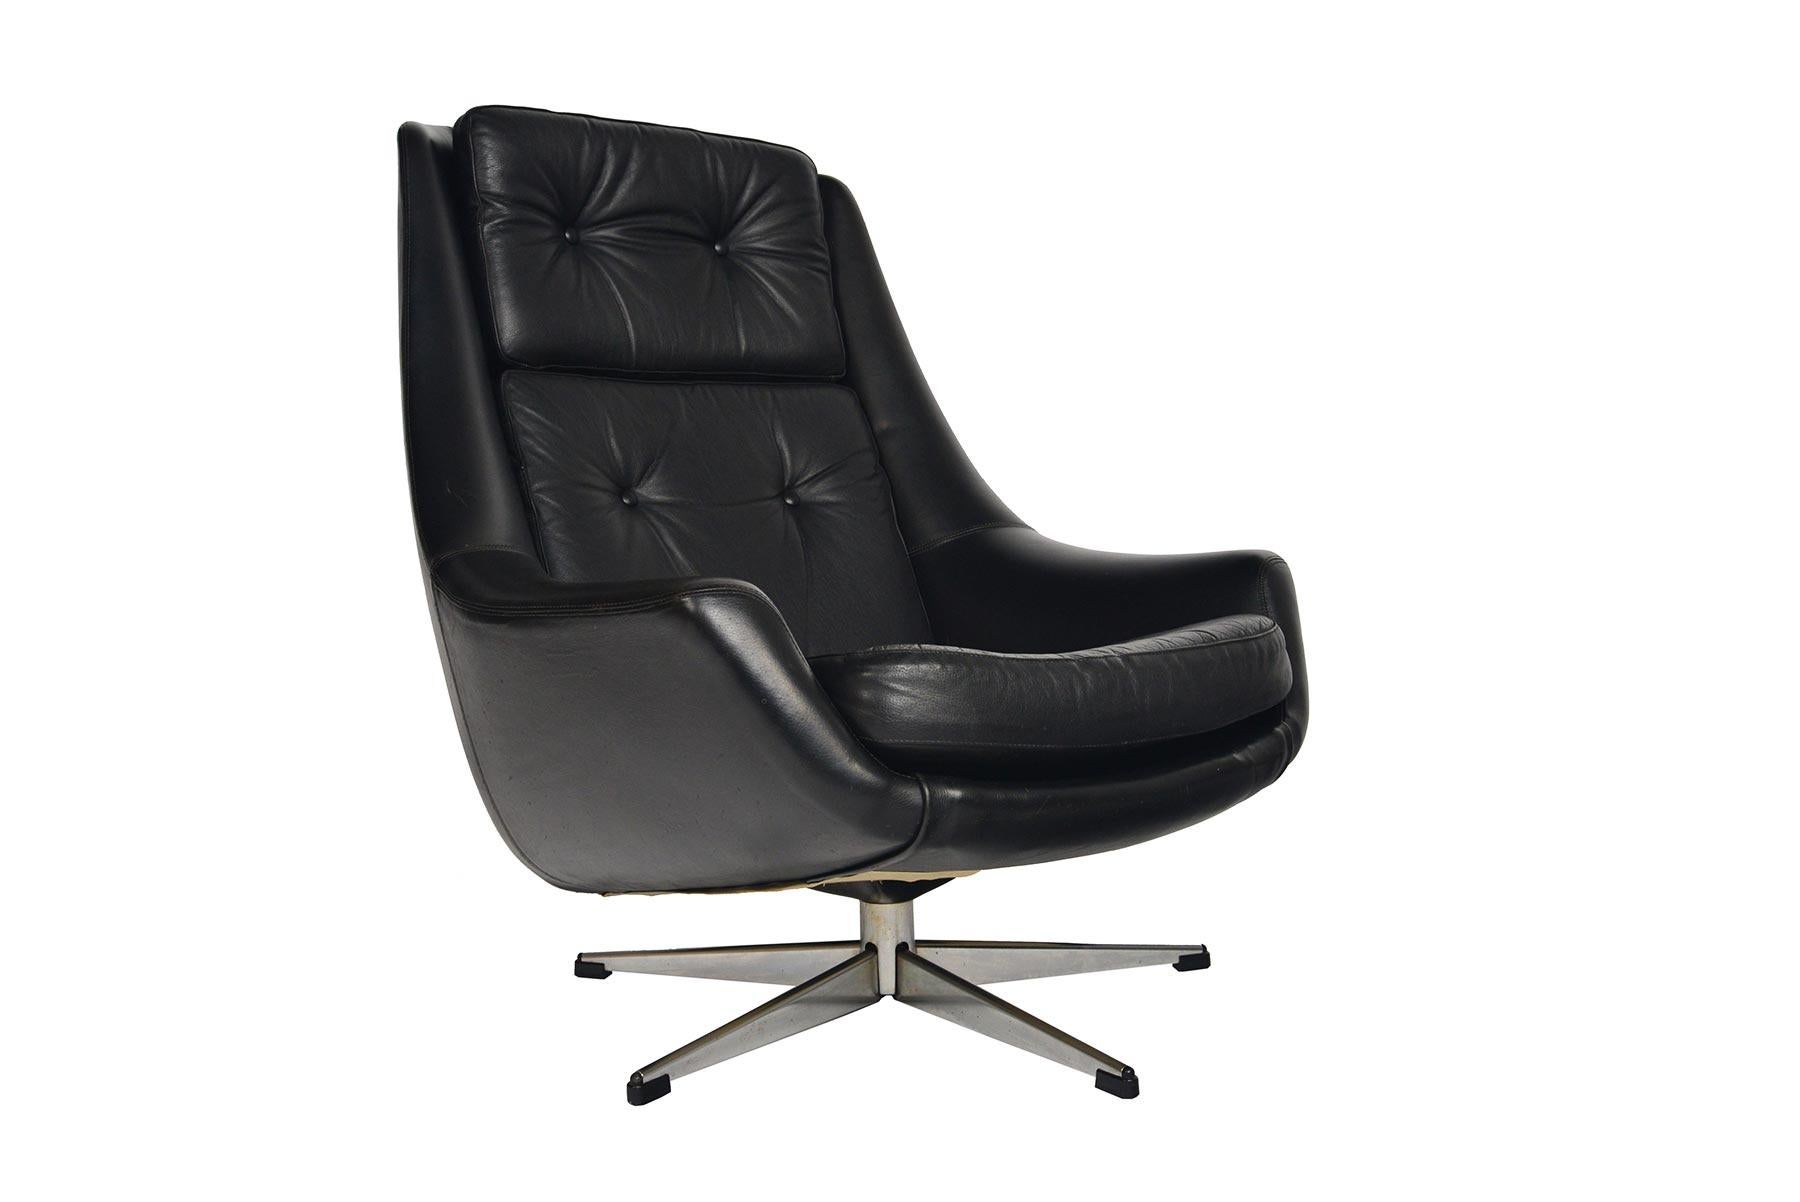 This wonderfully well- preserved swivel chair was designed by H.W. Klein for Bramin in the 1960s. With a sleek, organic form, this black leather lounge chair is upholstered on all sides and holds three button- tufted cushions. The swivel base offers